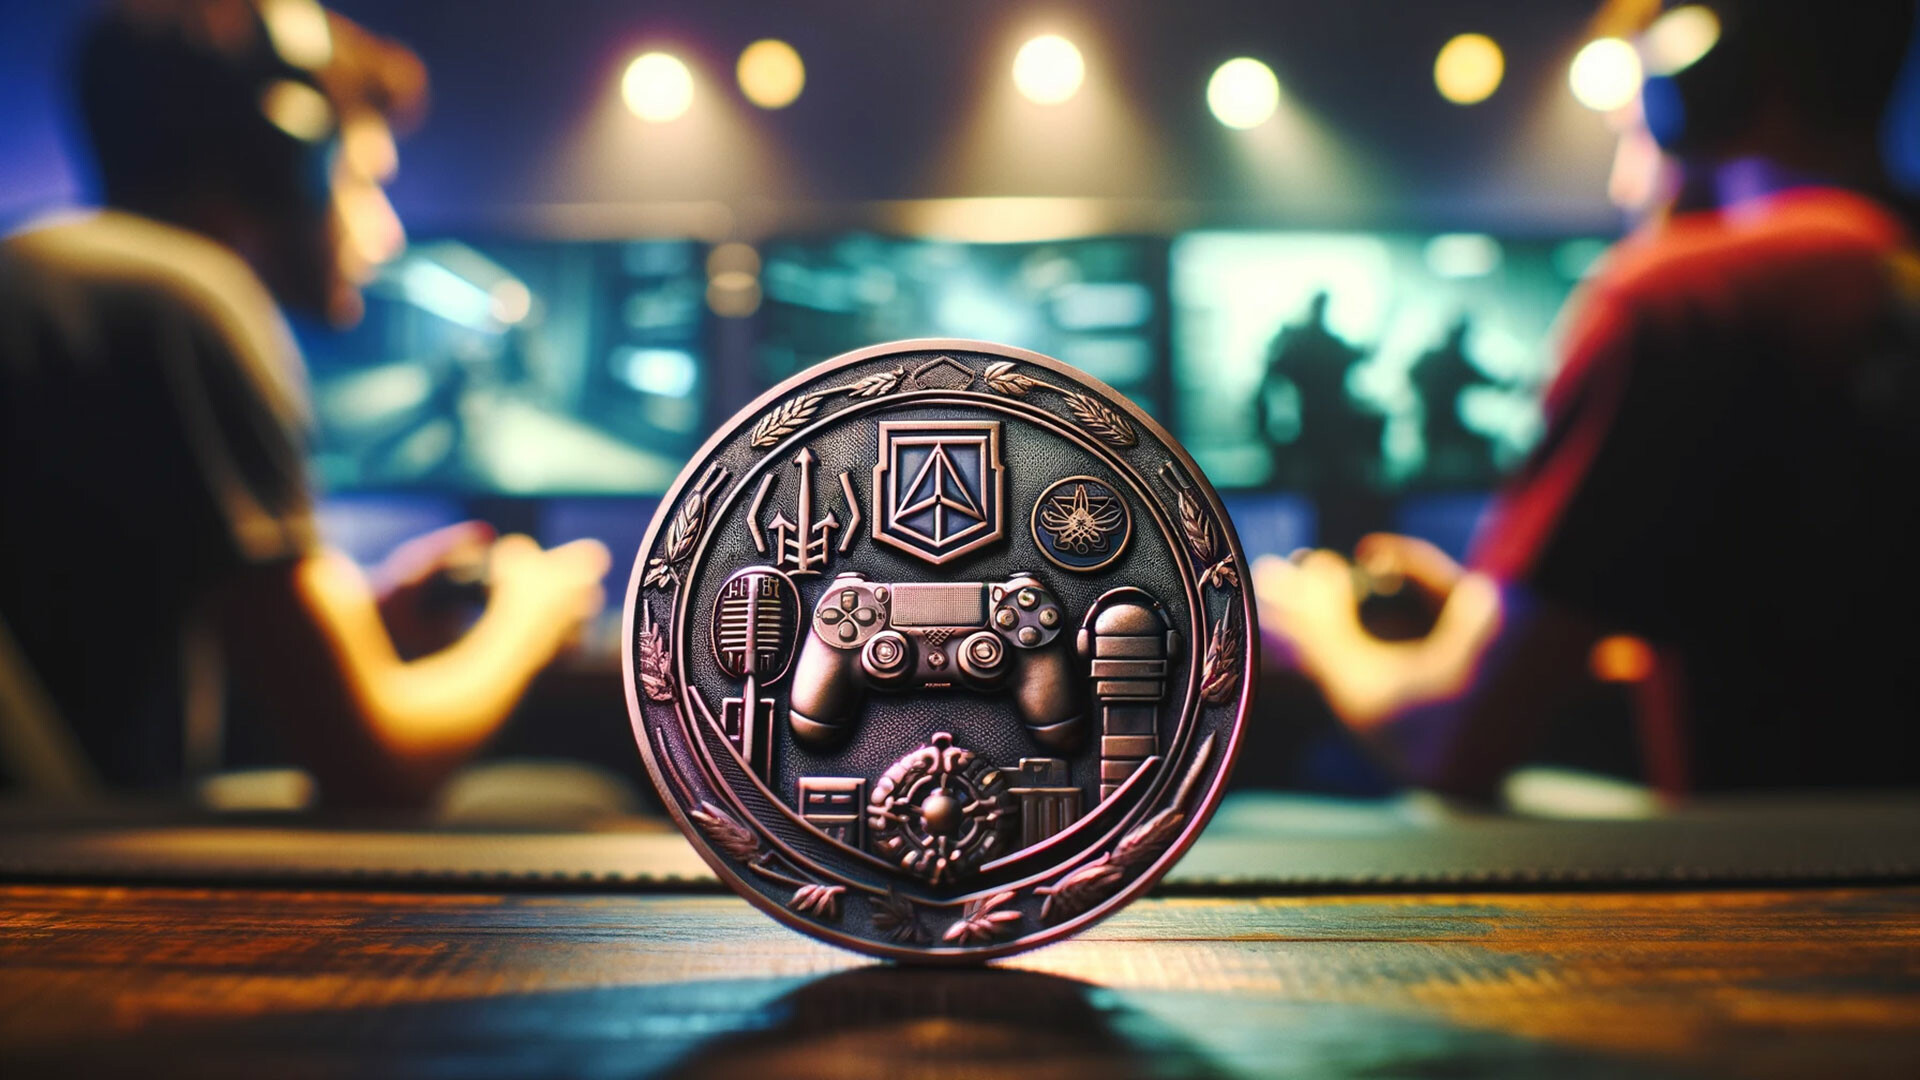 Custom Challenge Coins for Gamers Score Big!